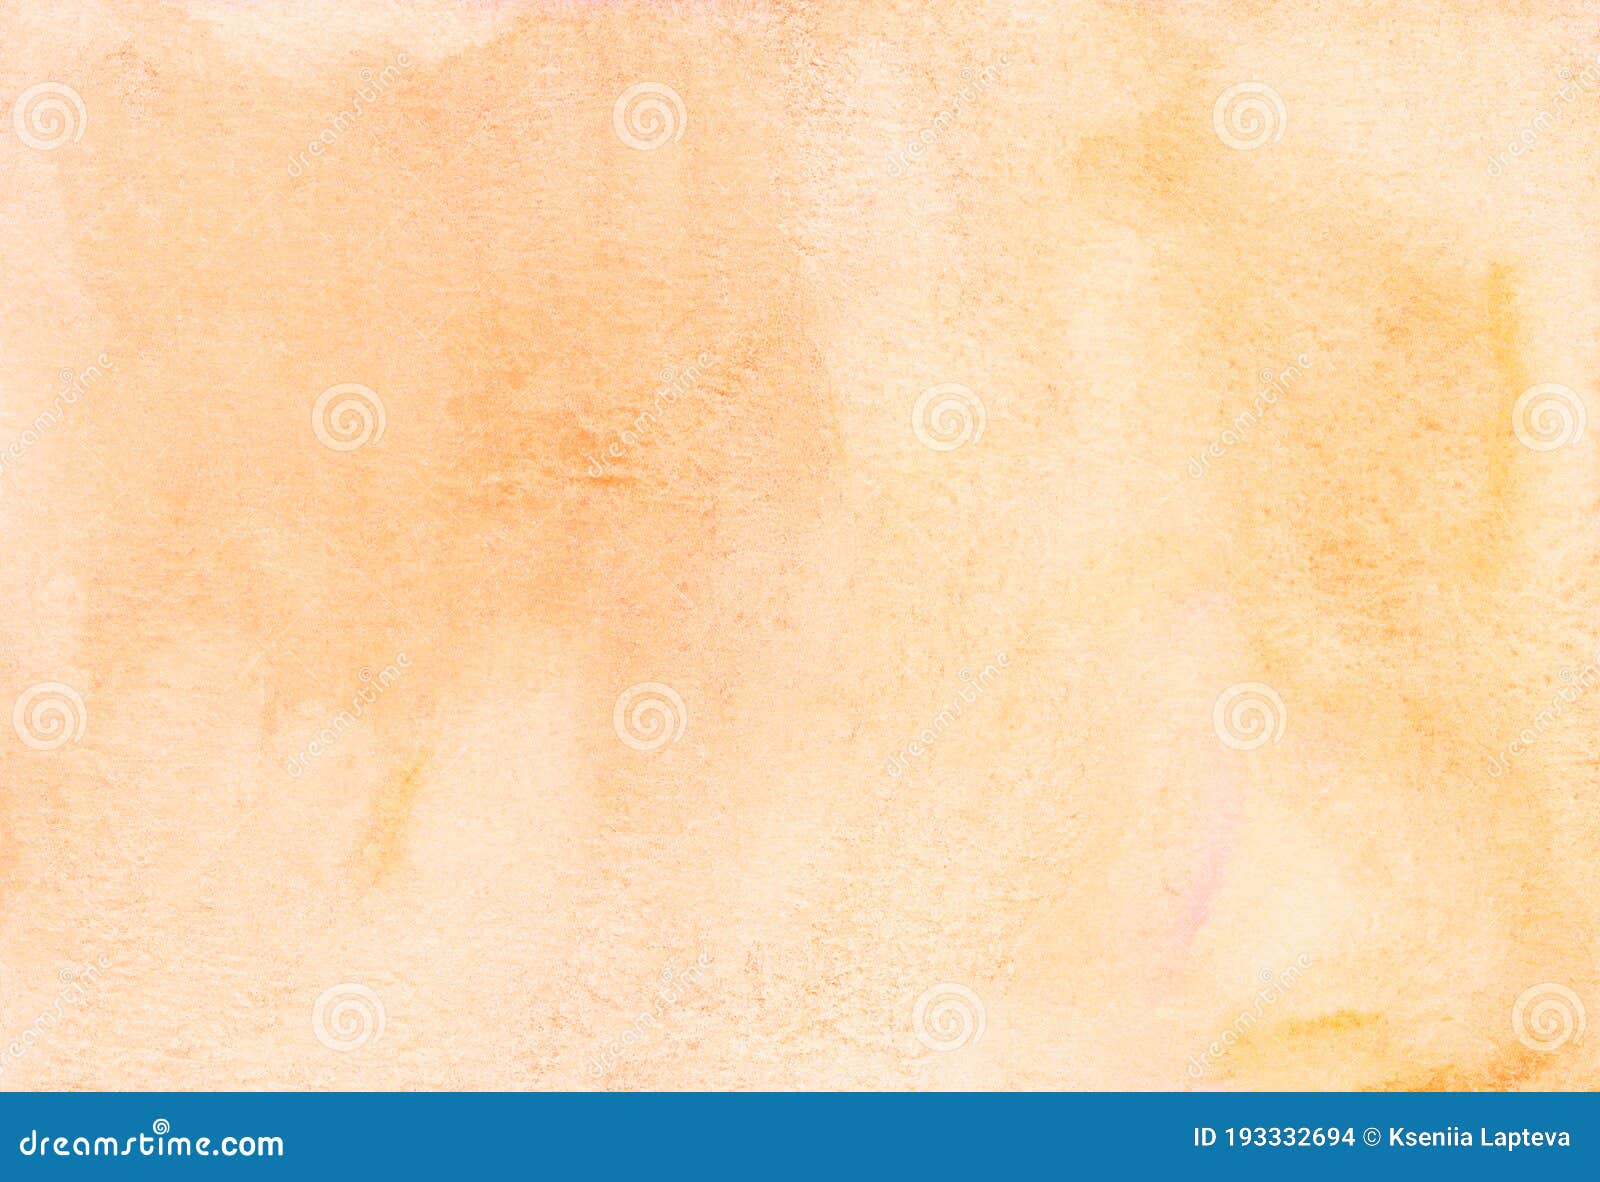 Watercolor Light Peach Color Background Texture Aquarelle Abstract Pastel Orange Backdrop Stock Photo Image Of Modern Mark